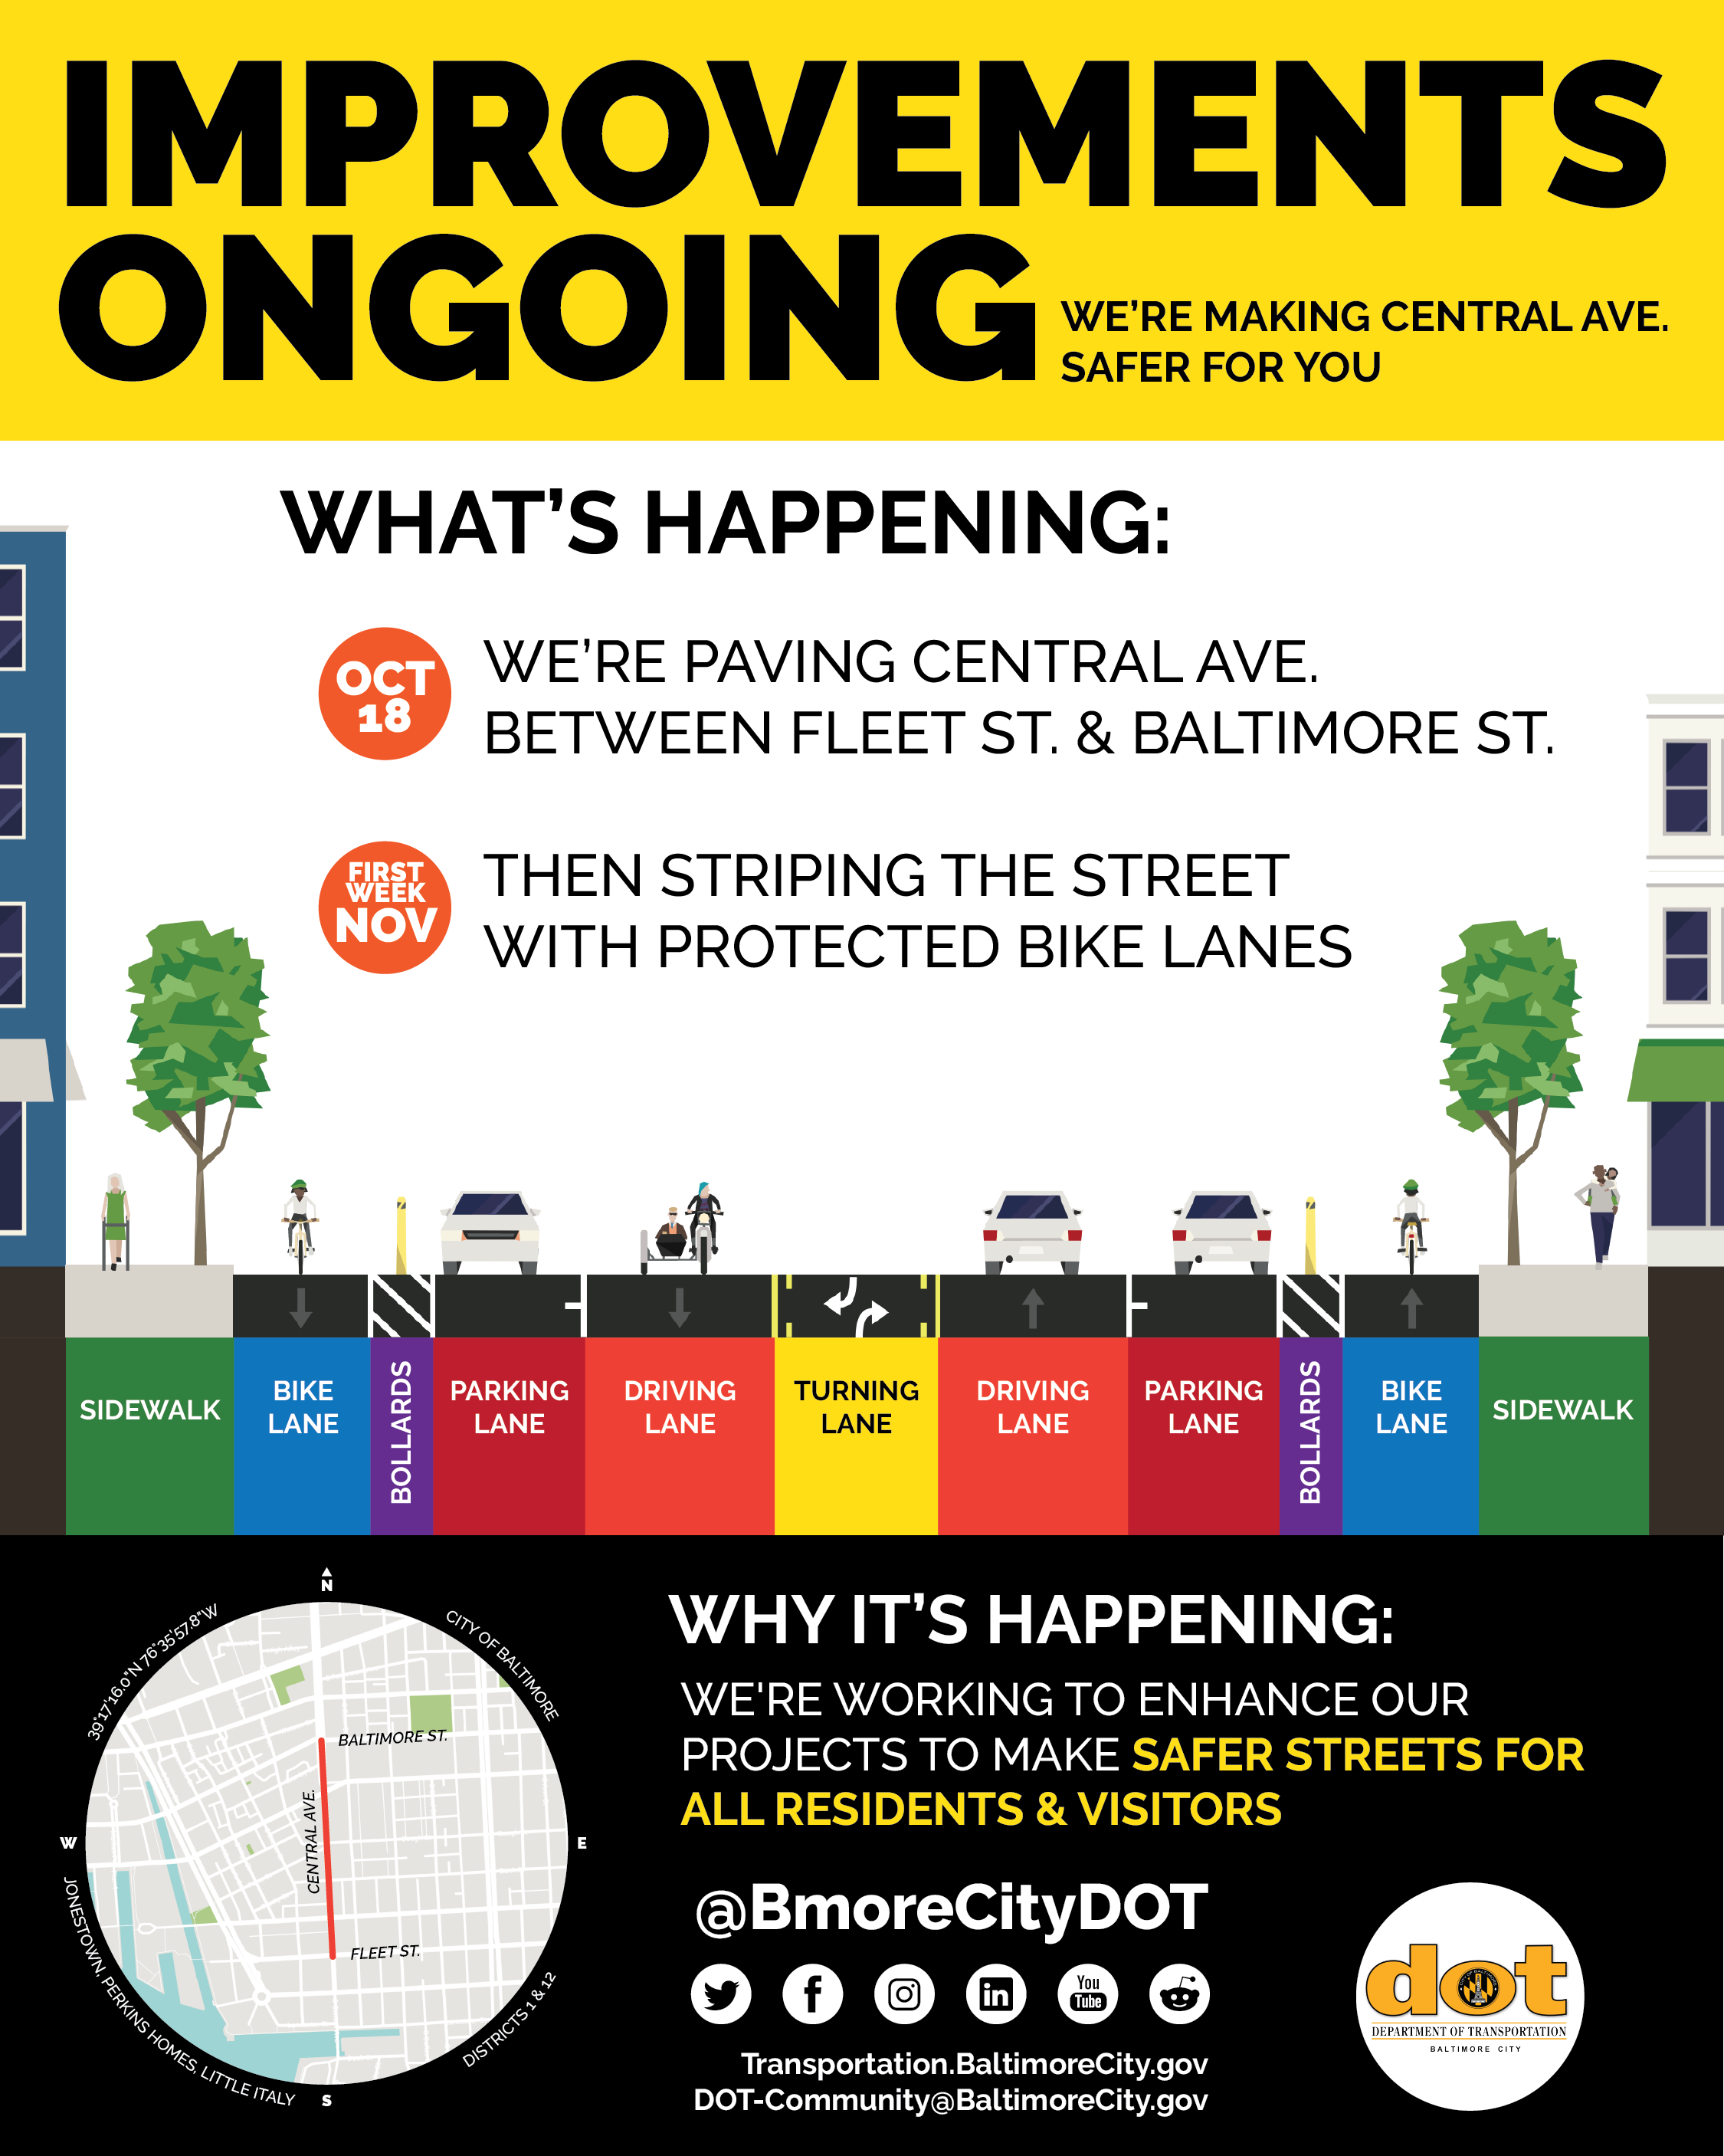 Improvements Ongoing. We're making Central Ave Safer For You. What's happening: Oct 18: We're paving Central Ave between Fleet St and Baltimore St. The first week of Nov, we're then striping the street with protected bike lanes.